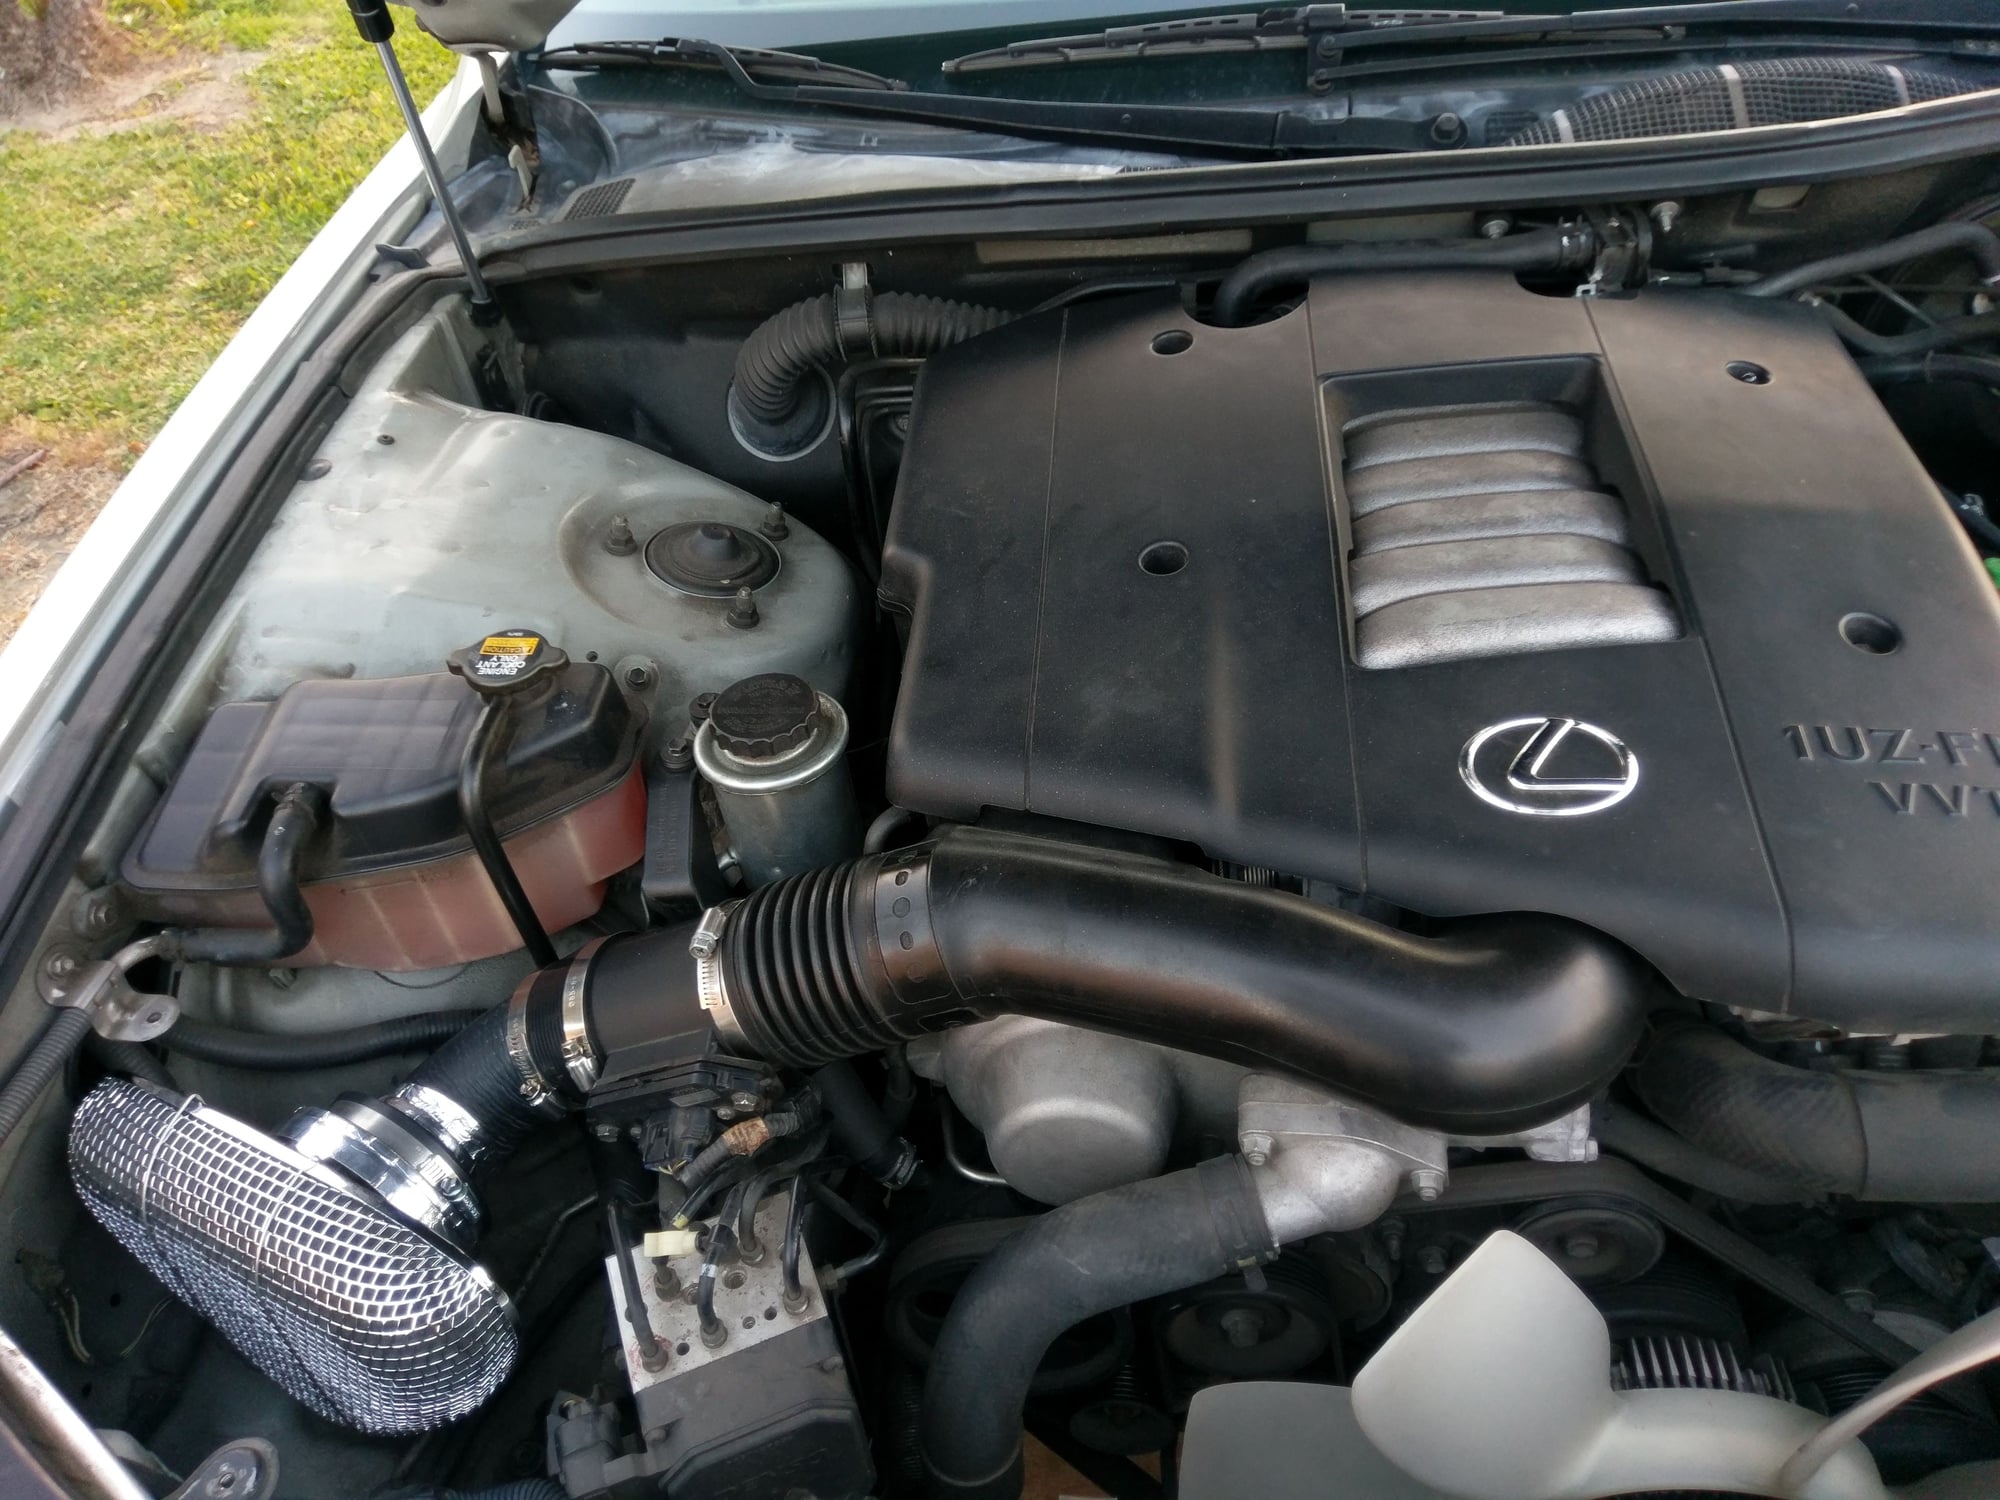 What did you do to your LS400 today? - Page 31 - ClubLexus - Lexus Forum Discussion